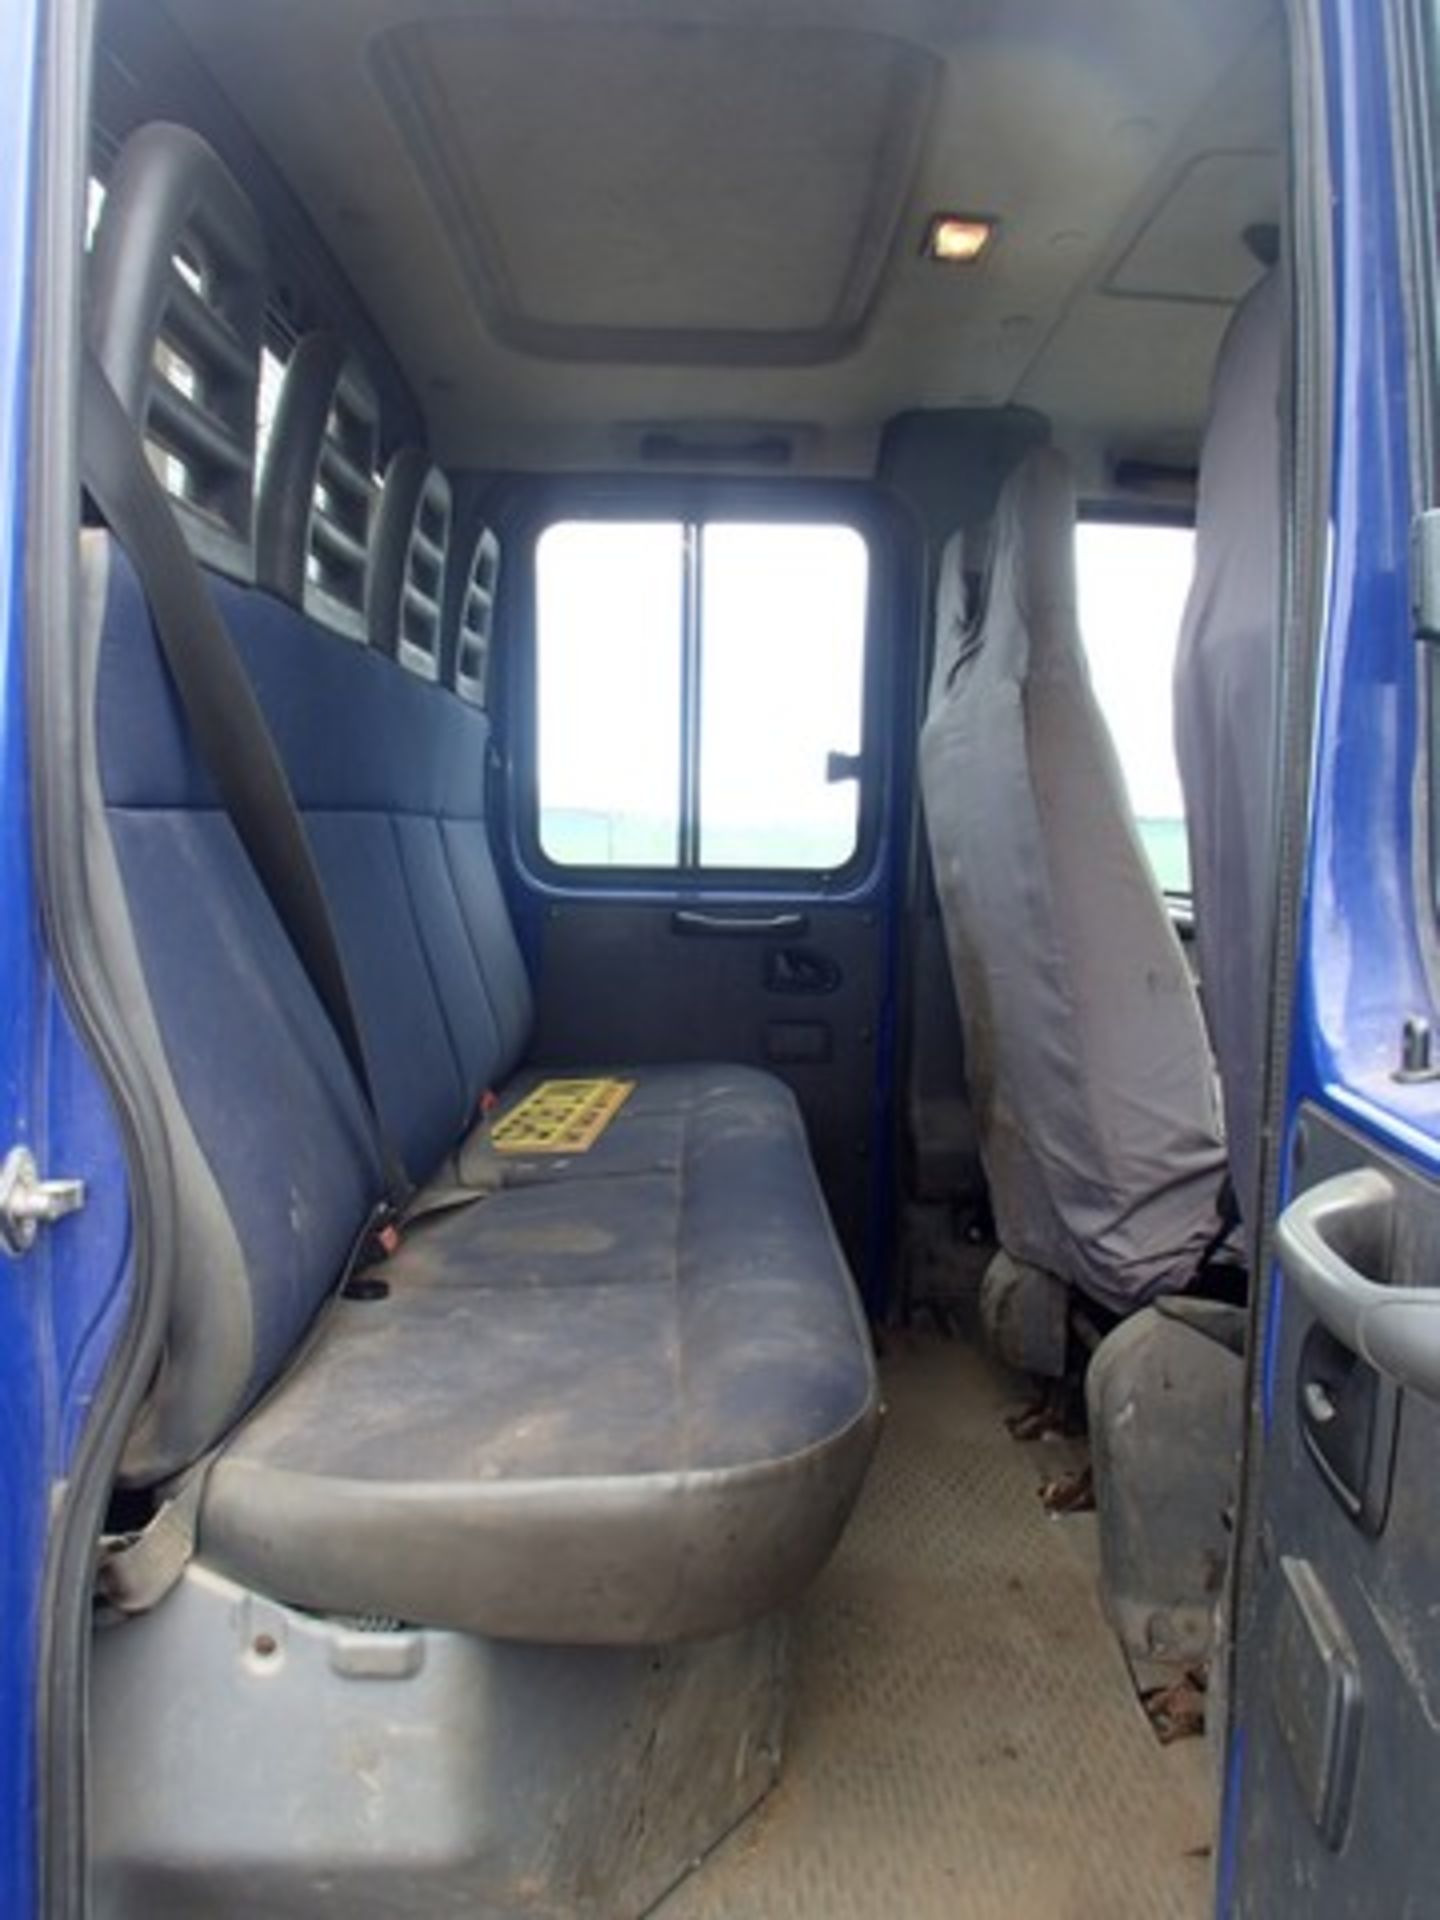 IVECO MODEL DAILY 50C15 - 2998cc - Image 12 of 24